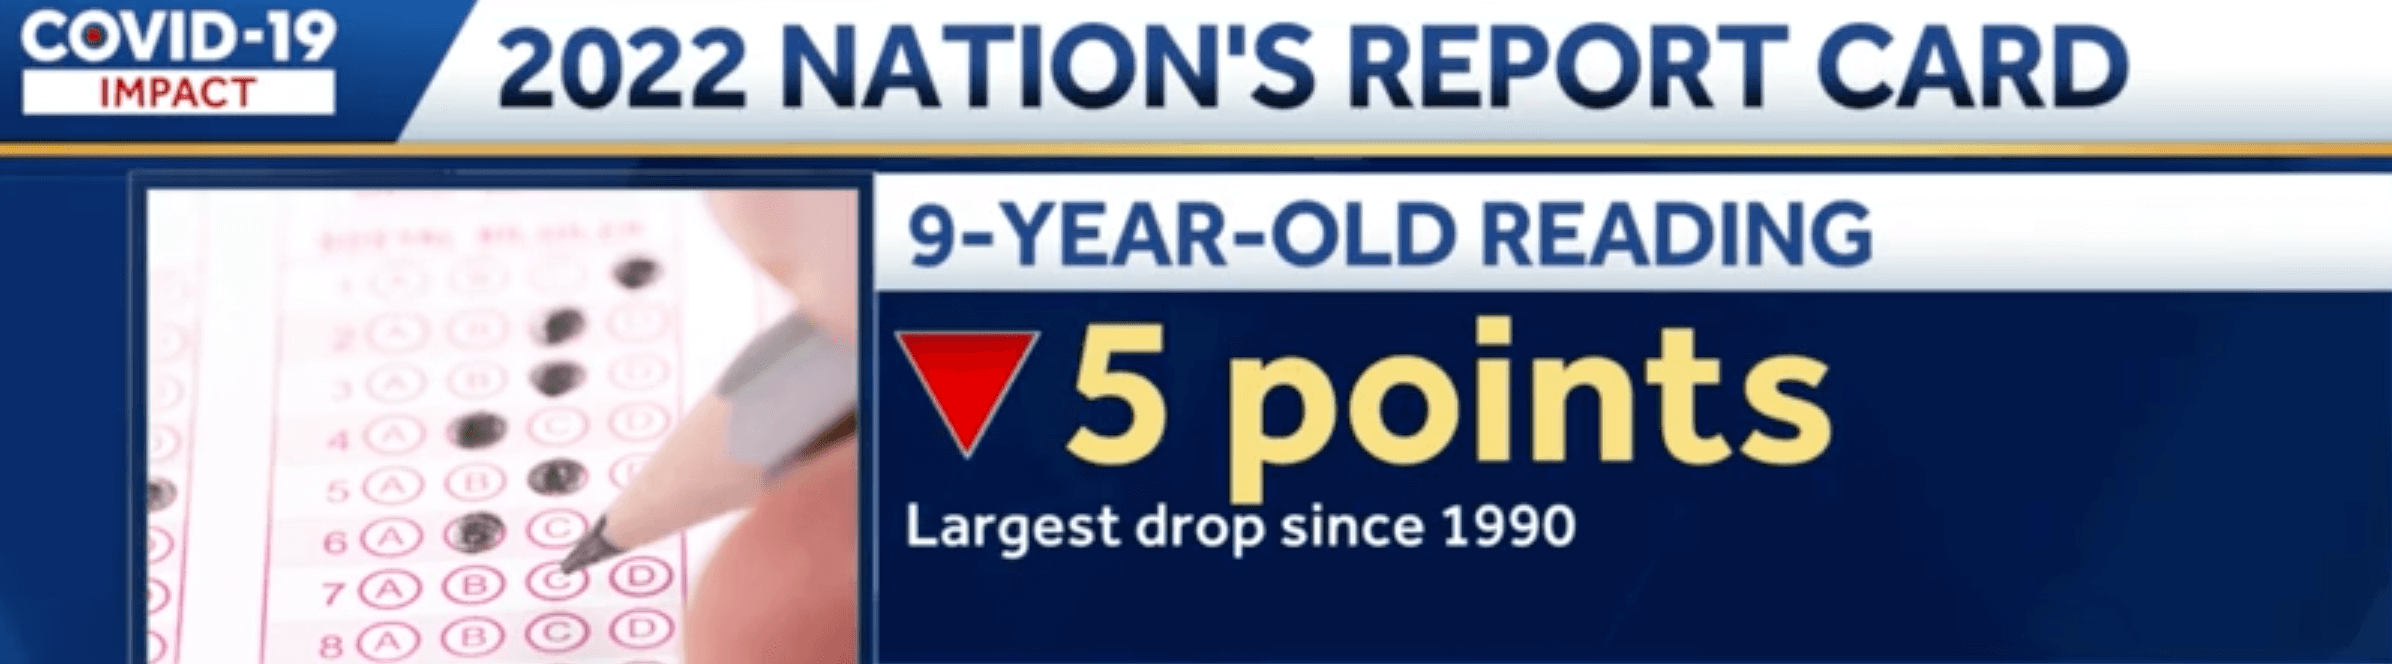 There was a 5 point drop in reading scores among 9-year-olds according to the nation's report card in 2022. It was the largest drop since 1990.